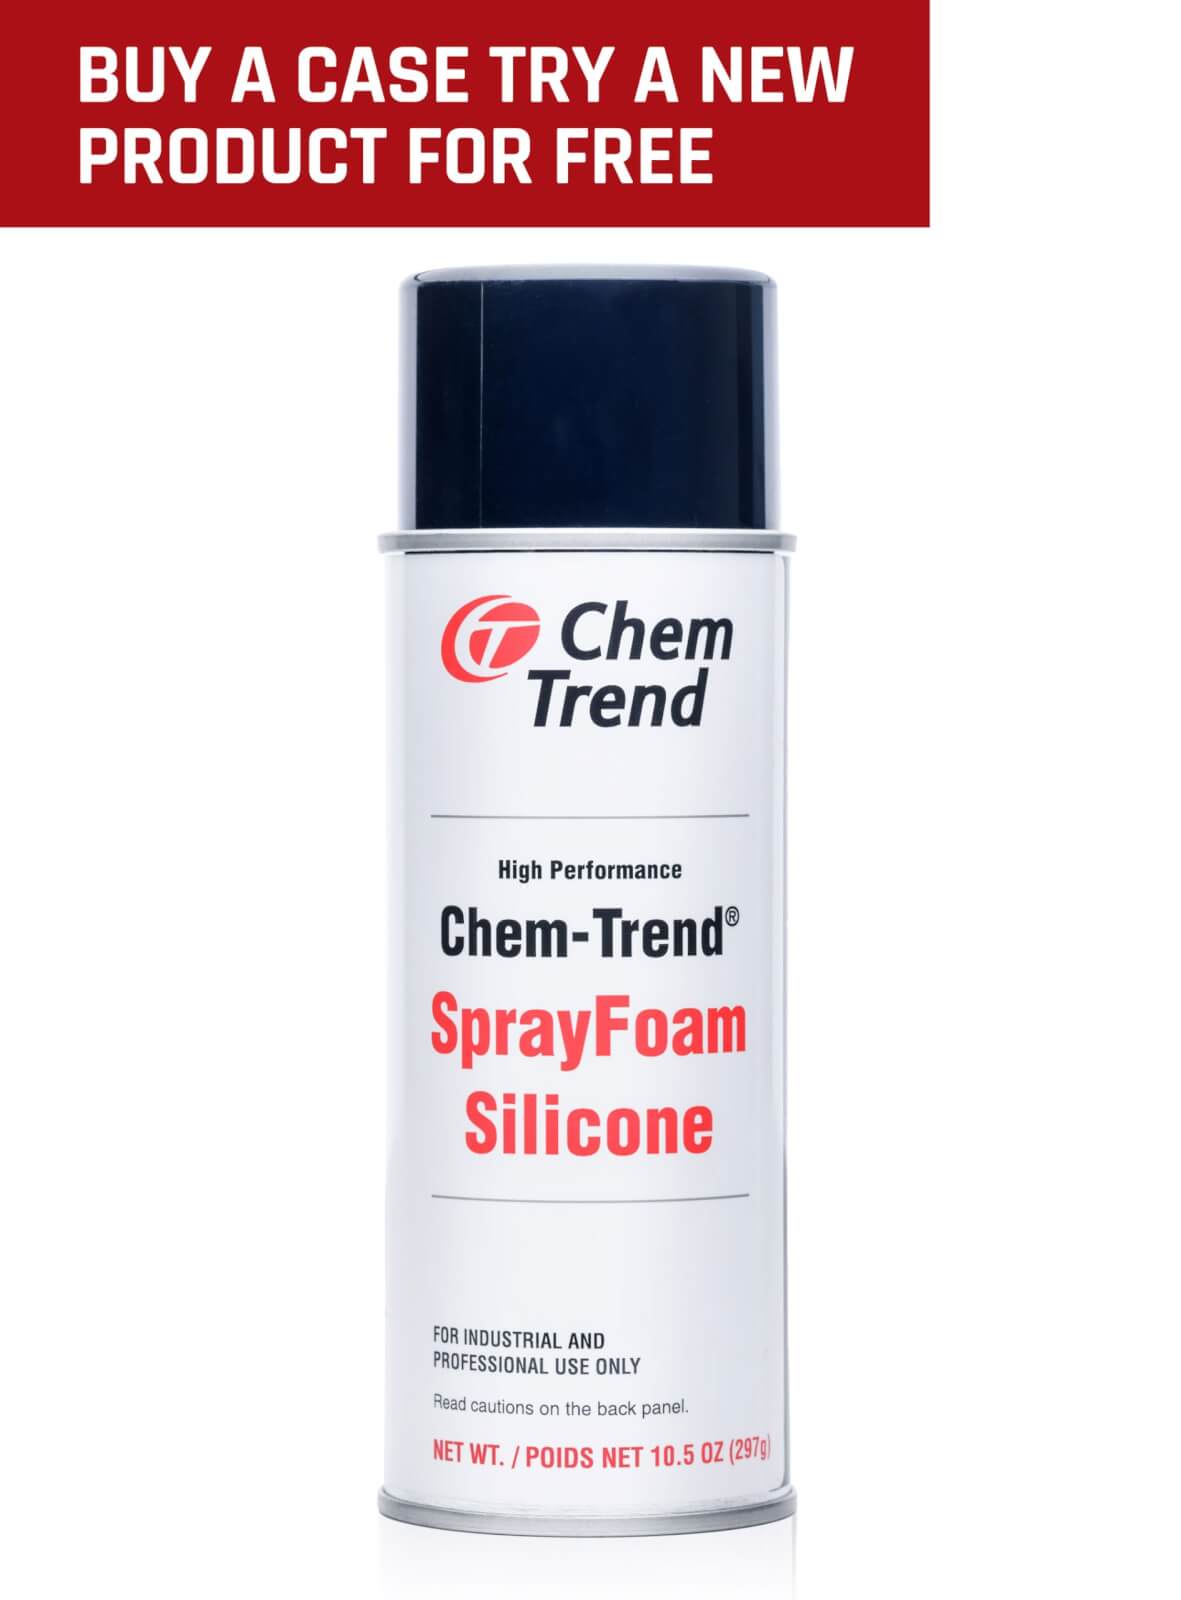 Chemtrend Silicone with deal